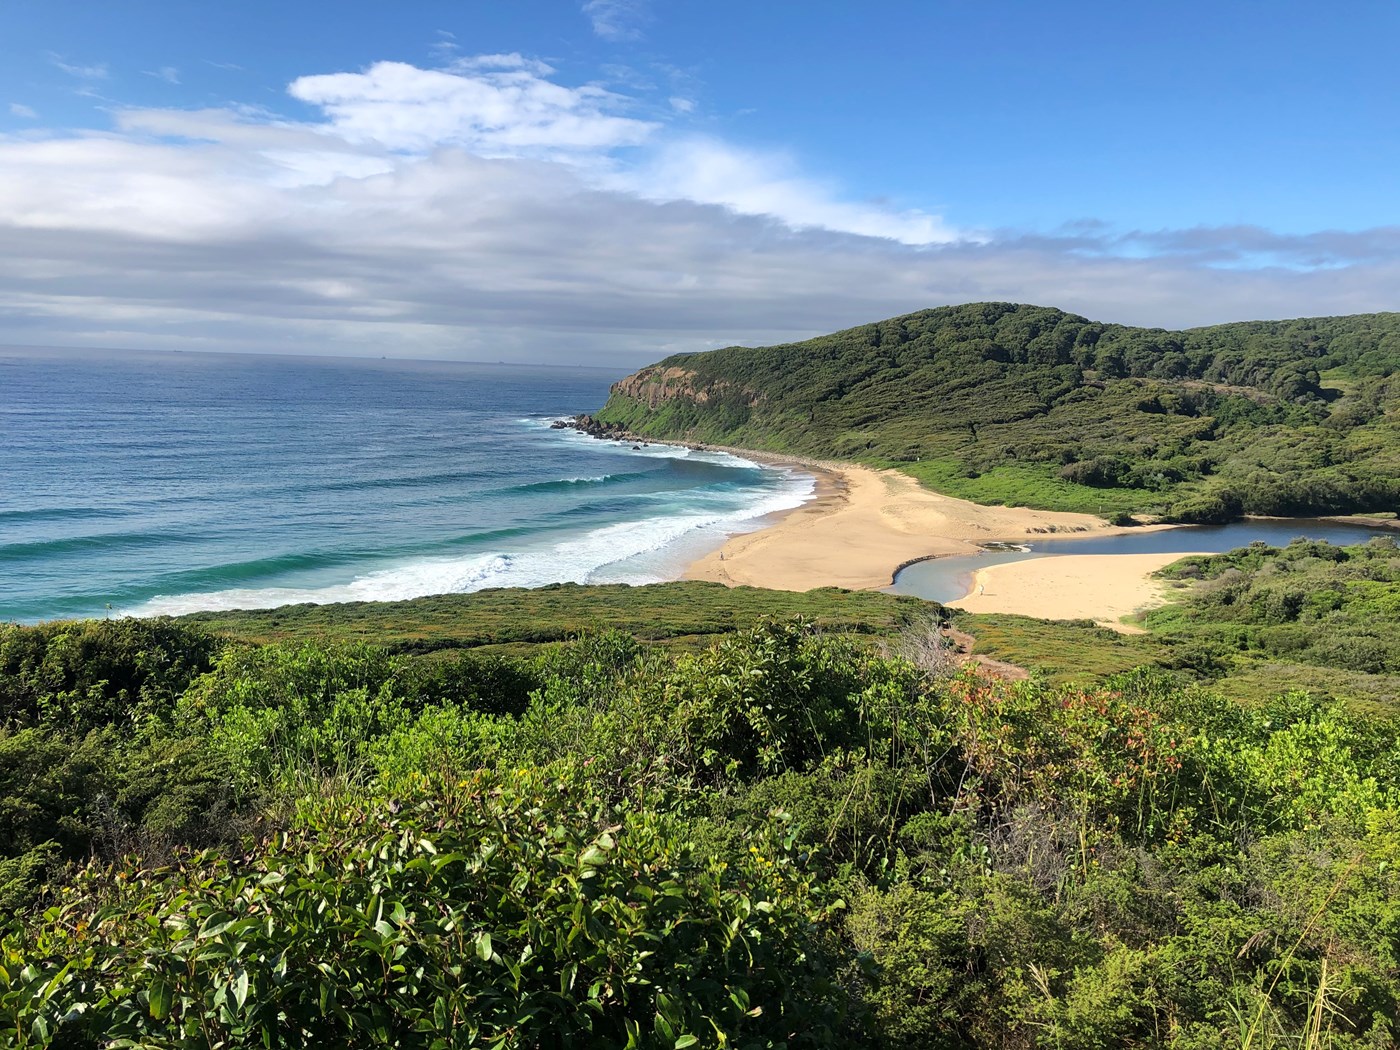 Glenrock State Conservation Area (Image credit: City of Newcastle)